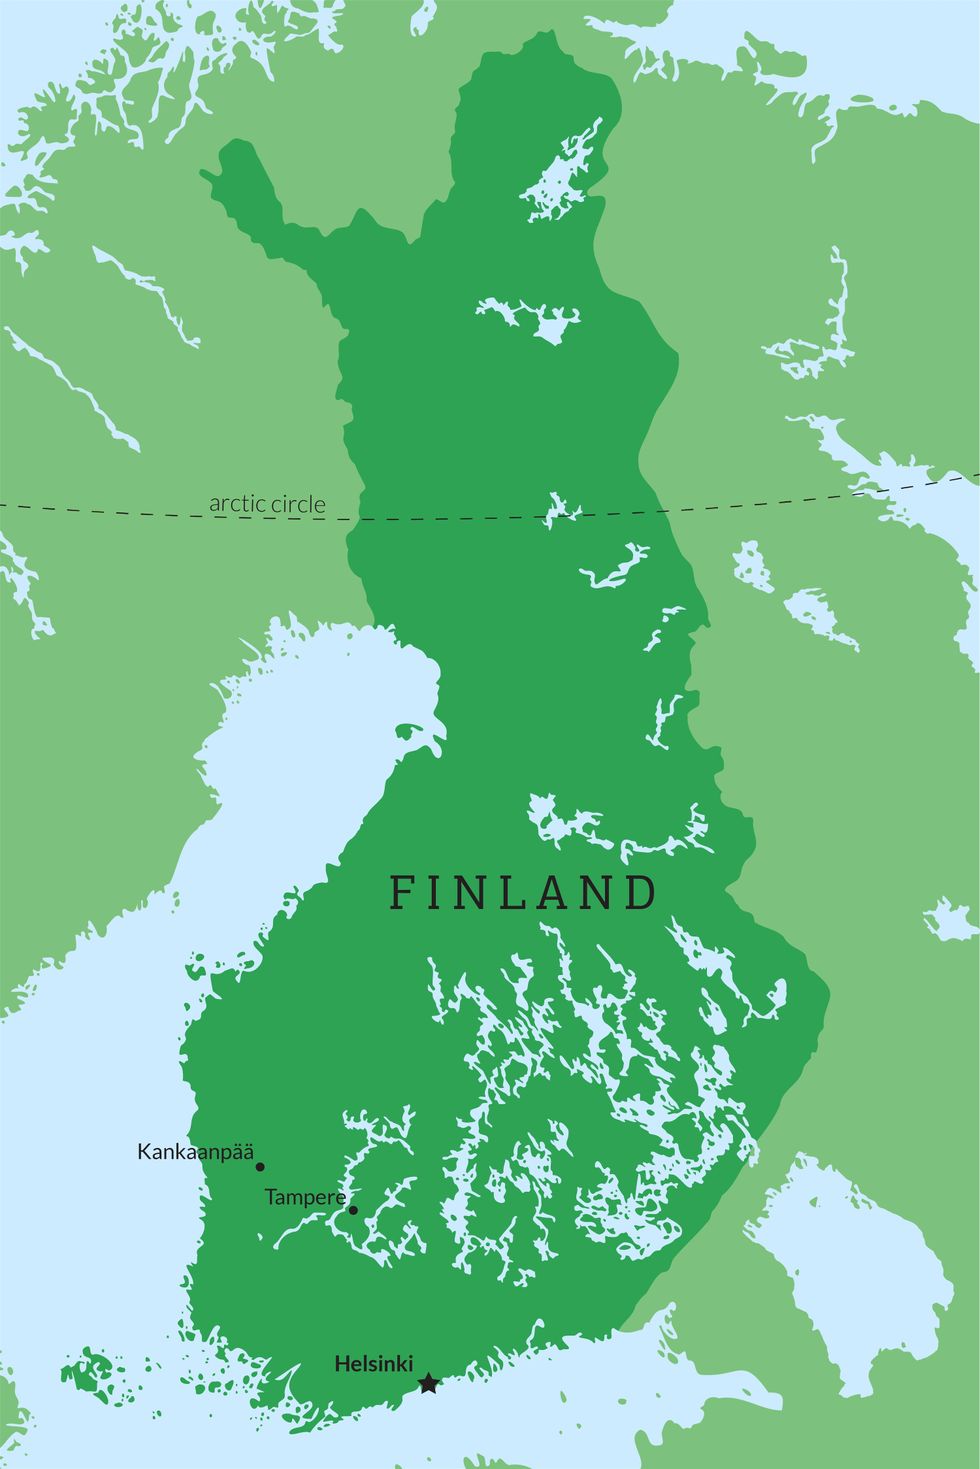 A map of Finland showing its capital Helsinki and two other cities.